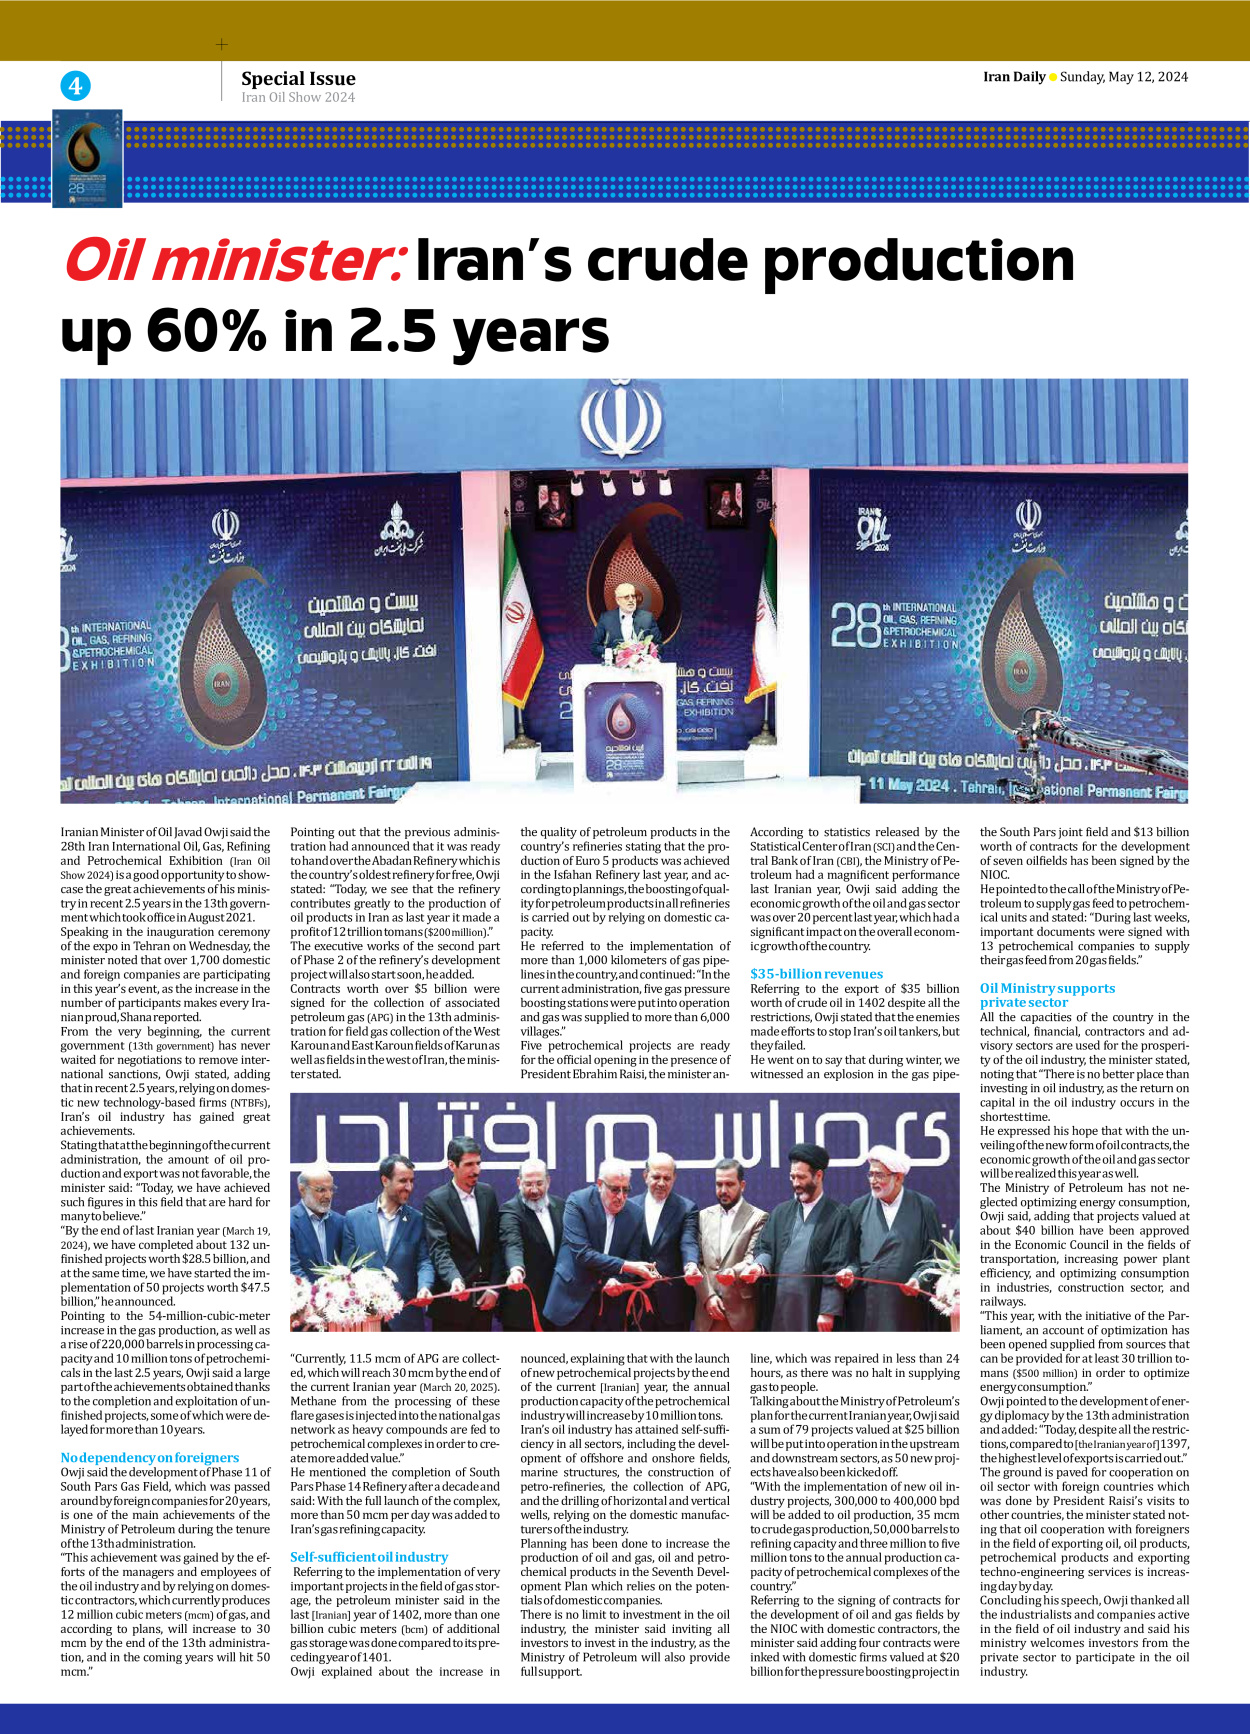 Iran Daily - Number Seven Thousand Five Hundred and Fifty Five - 12 May 2024 - Page 4